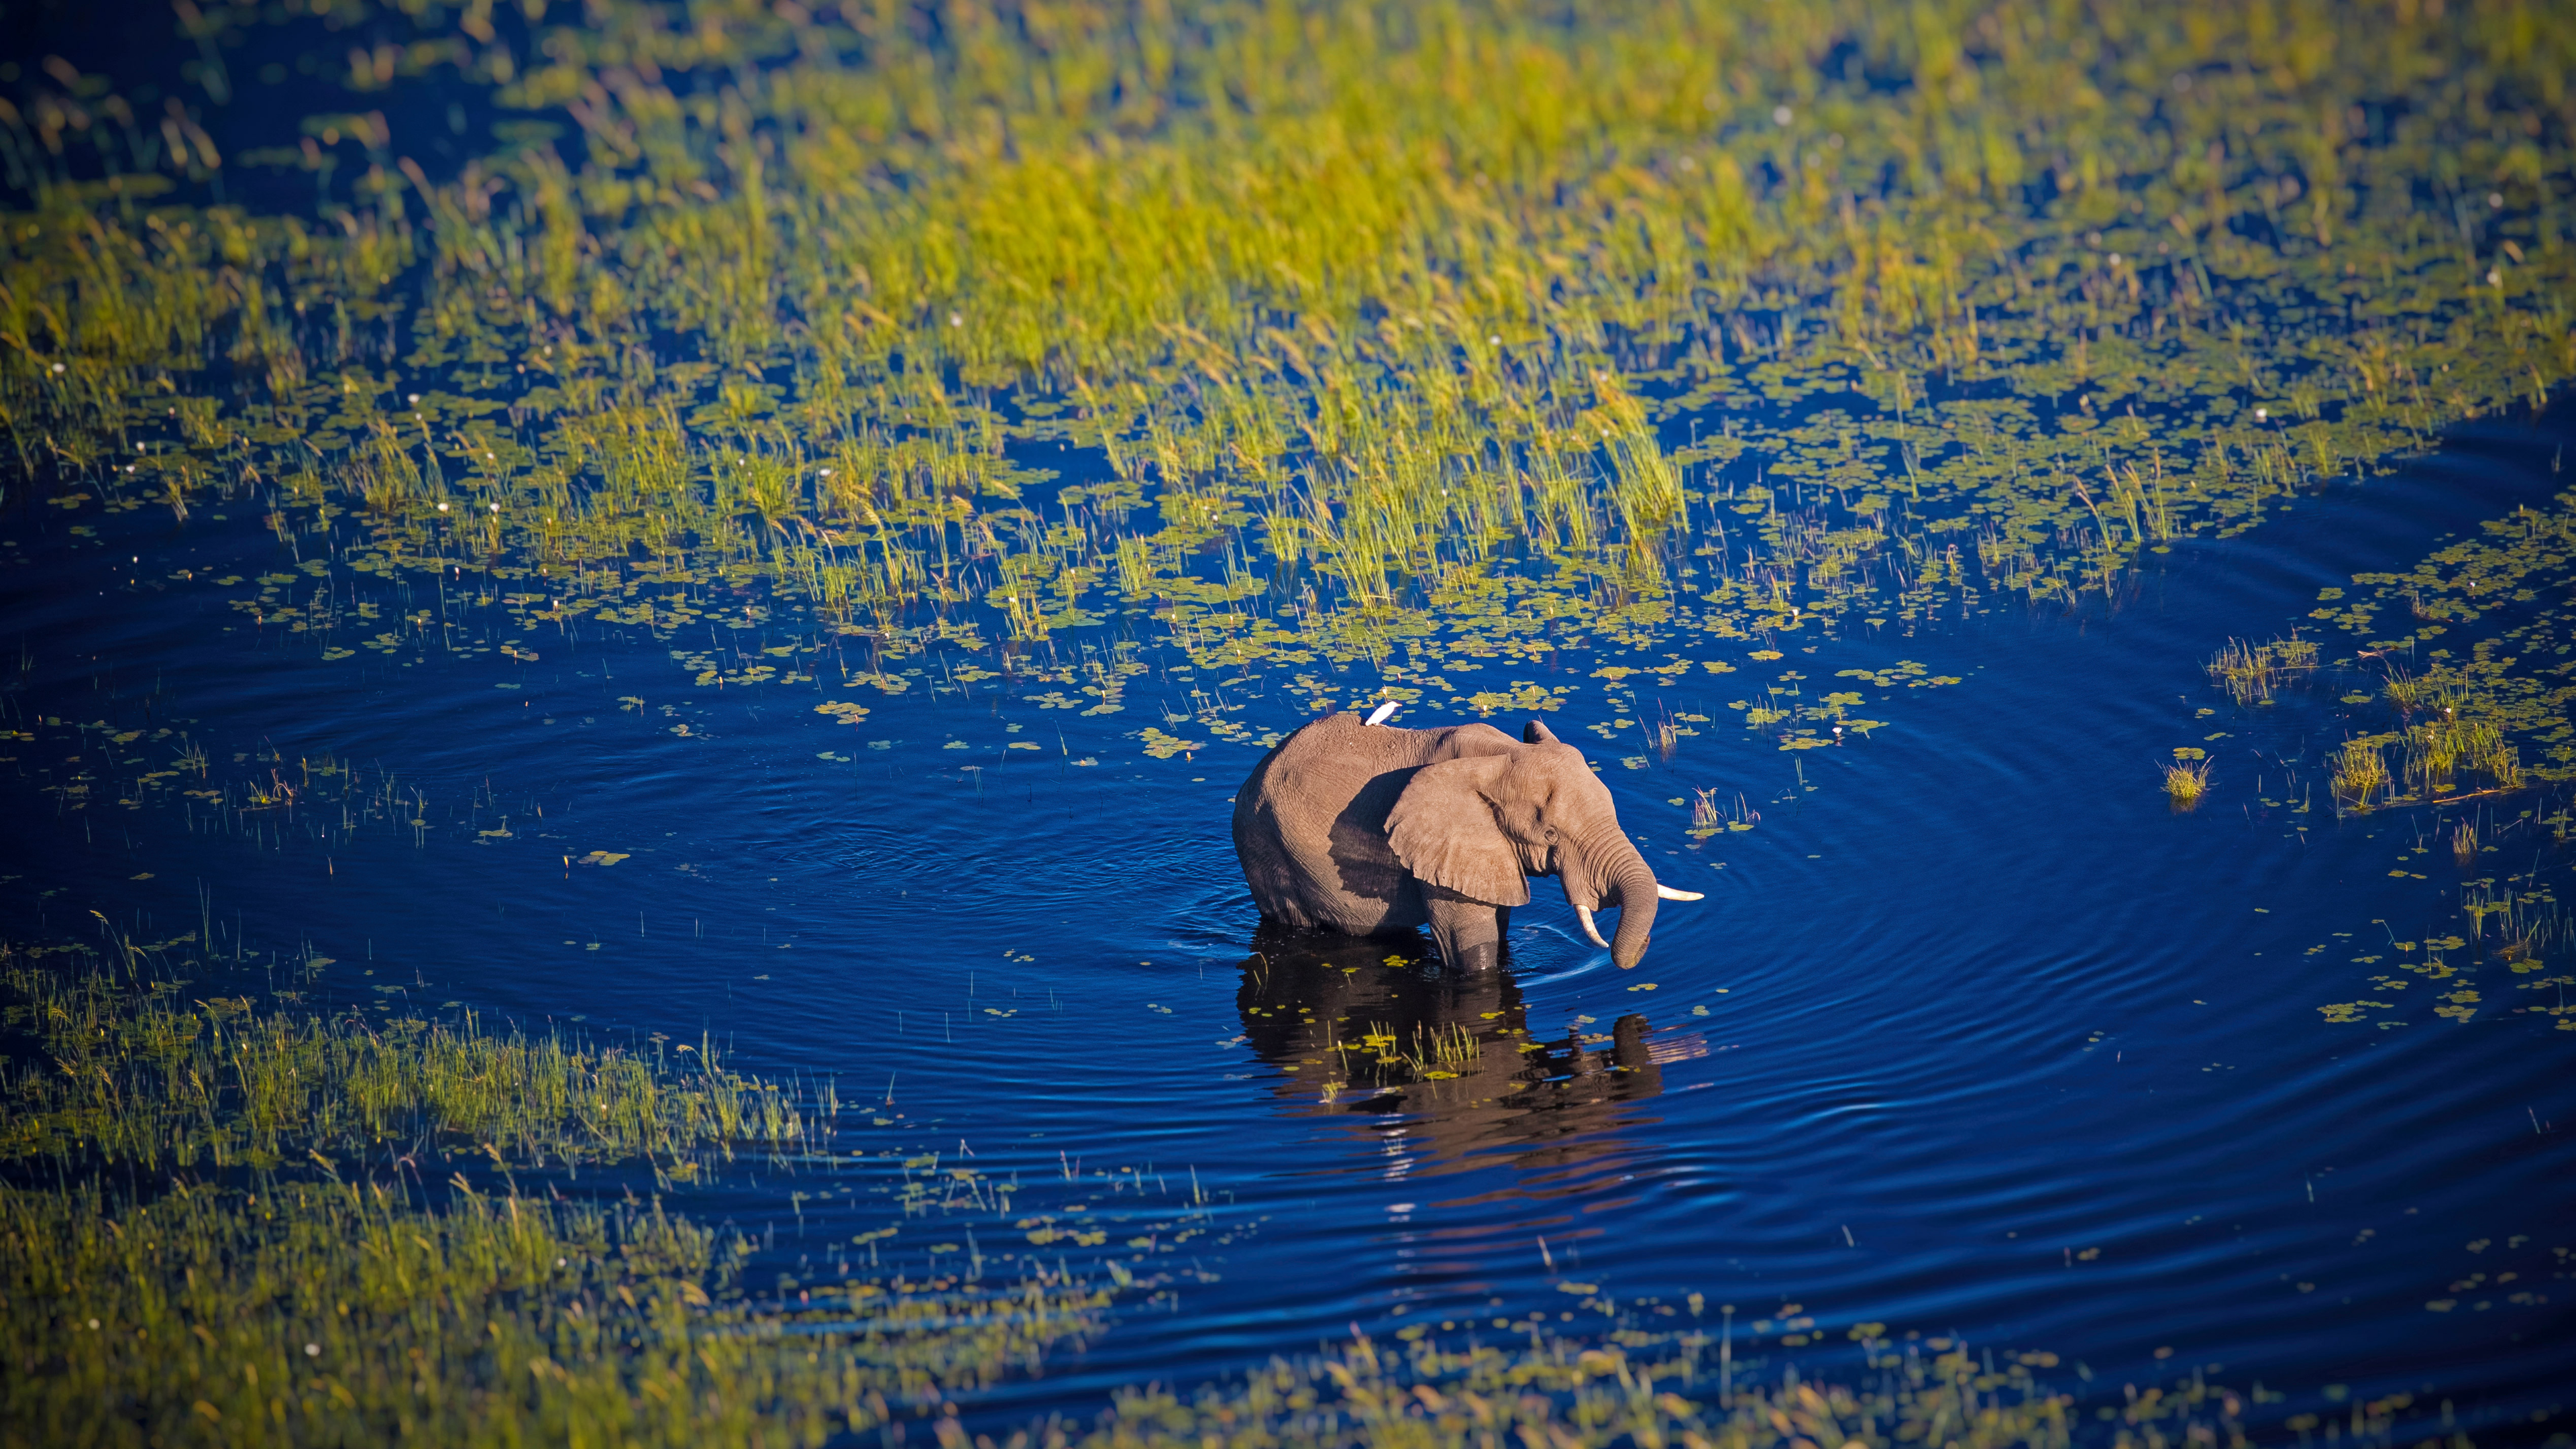 General 3840x2160 nature landscape animals water swamp river elephant Botswana Africa mammals standing in water